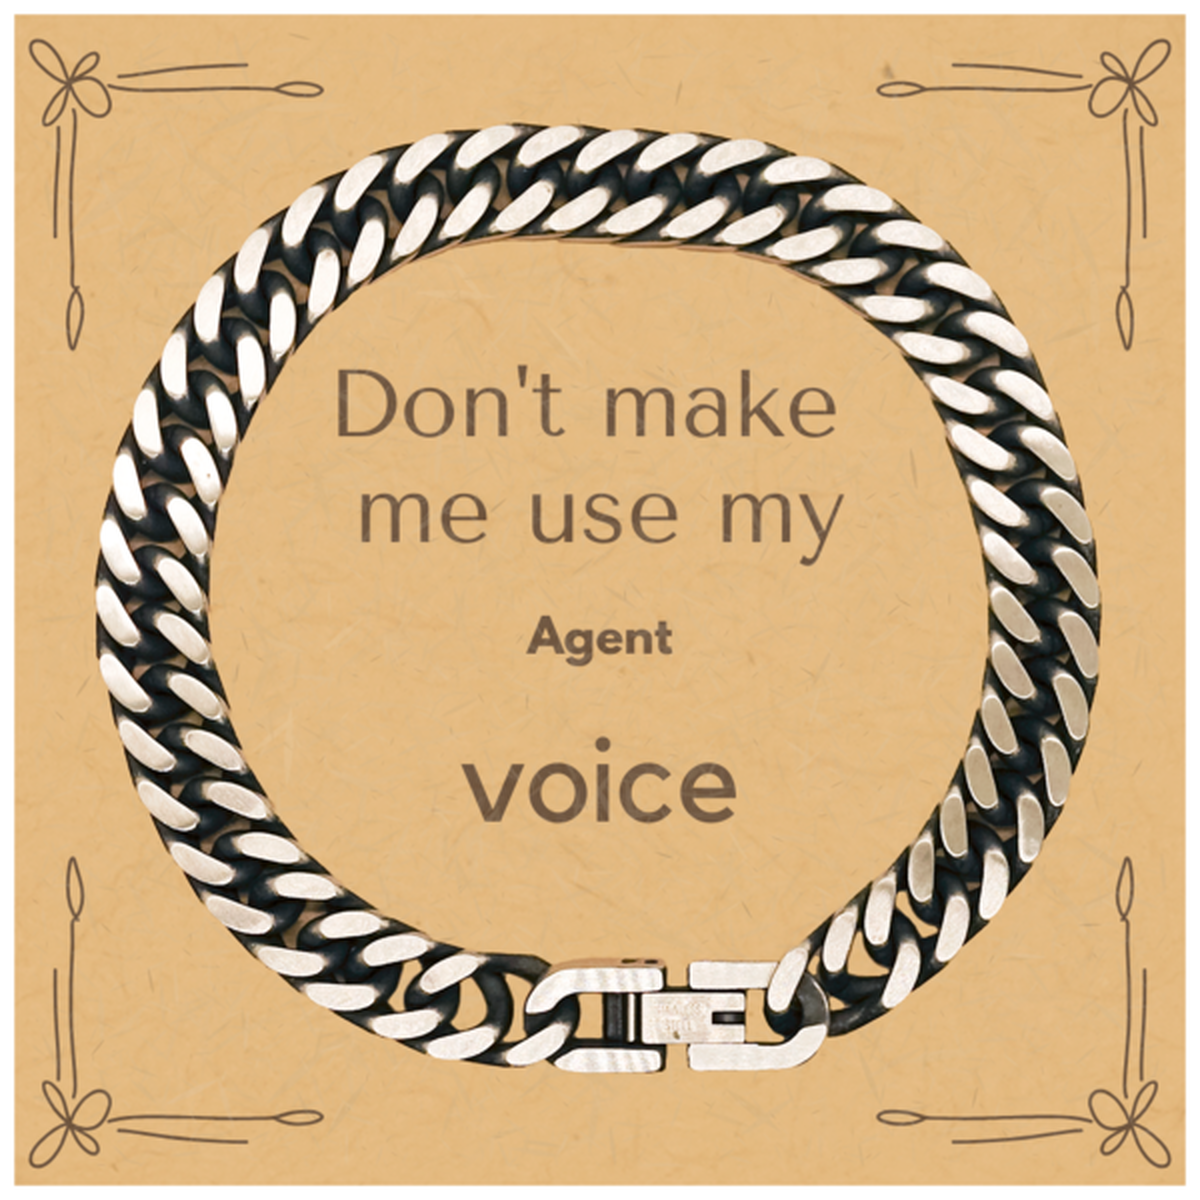 Don't make me use my Agent voice, Sarcasm Agent Card Gifts, Christmas Agent Cuban Link Chain Bracelet Birthday Unique Gifts For Agent Coworkers, Men, Women, Colleague, Friends